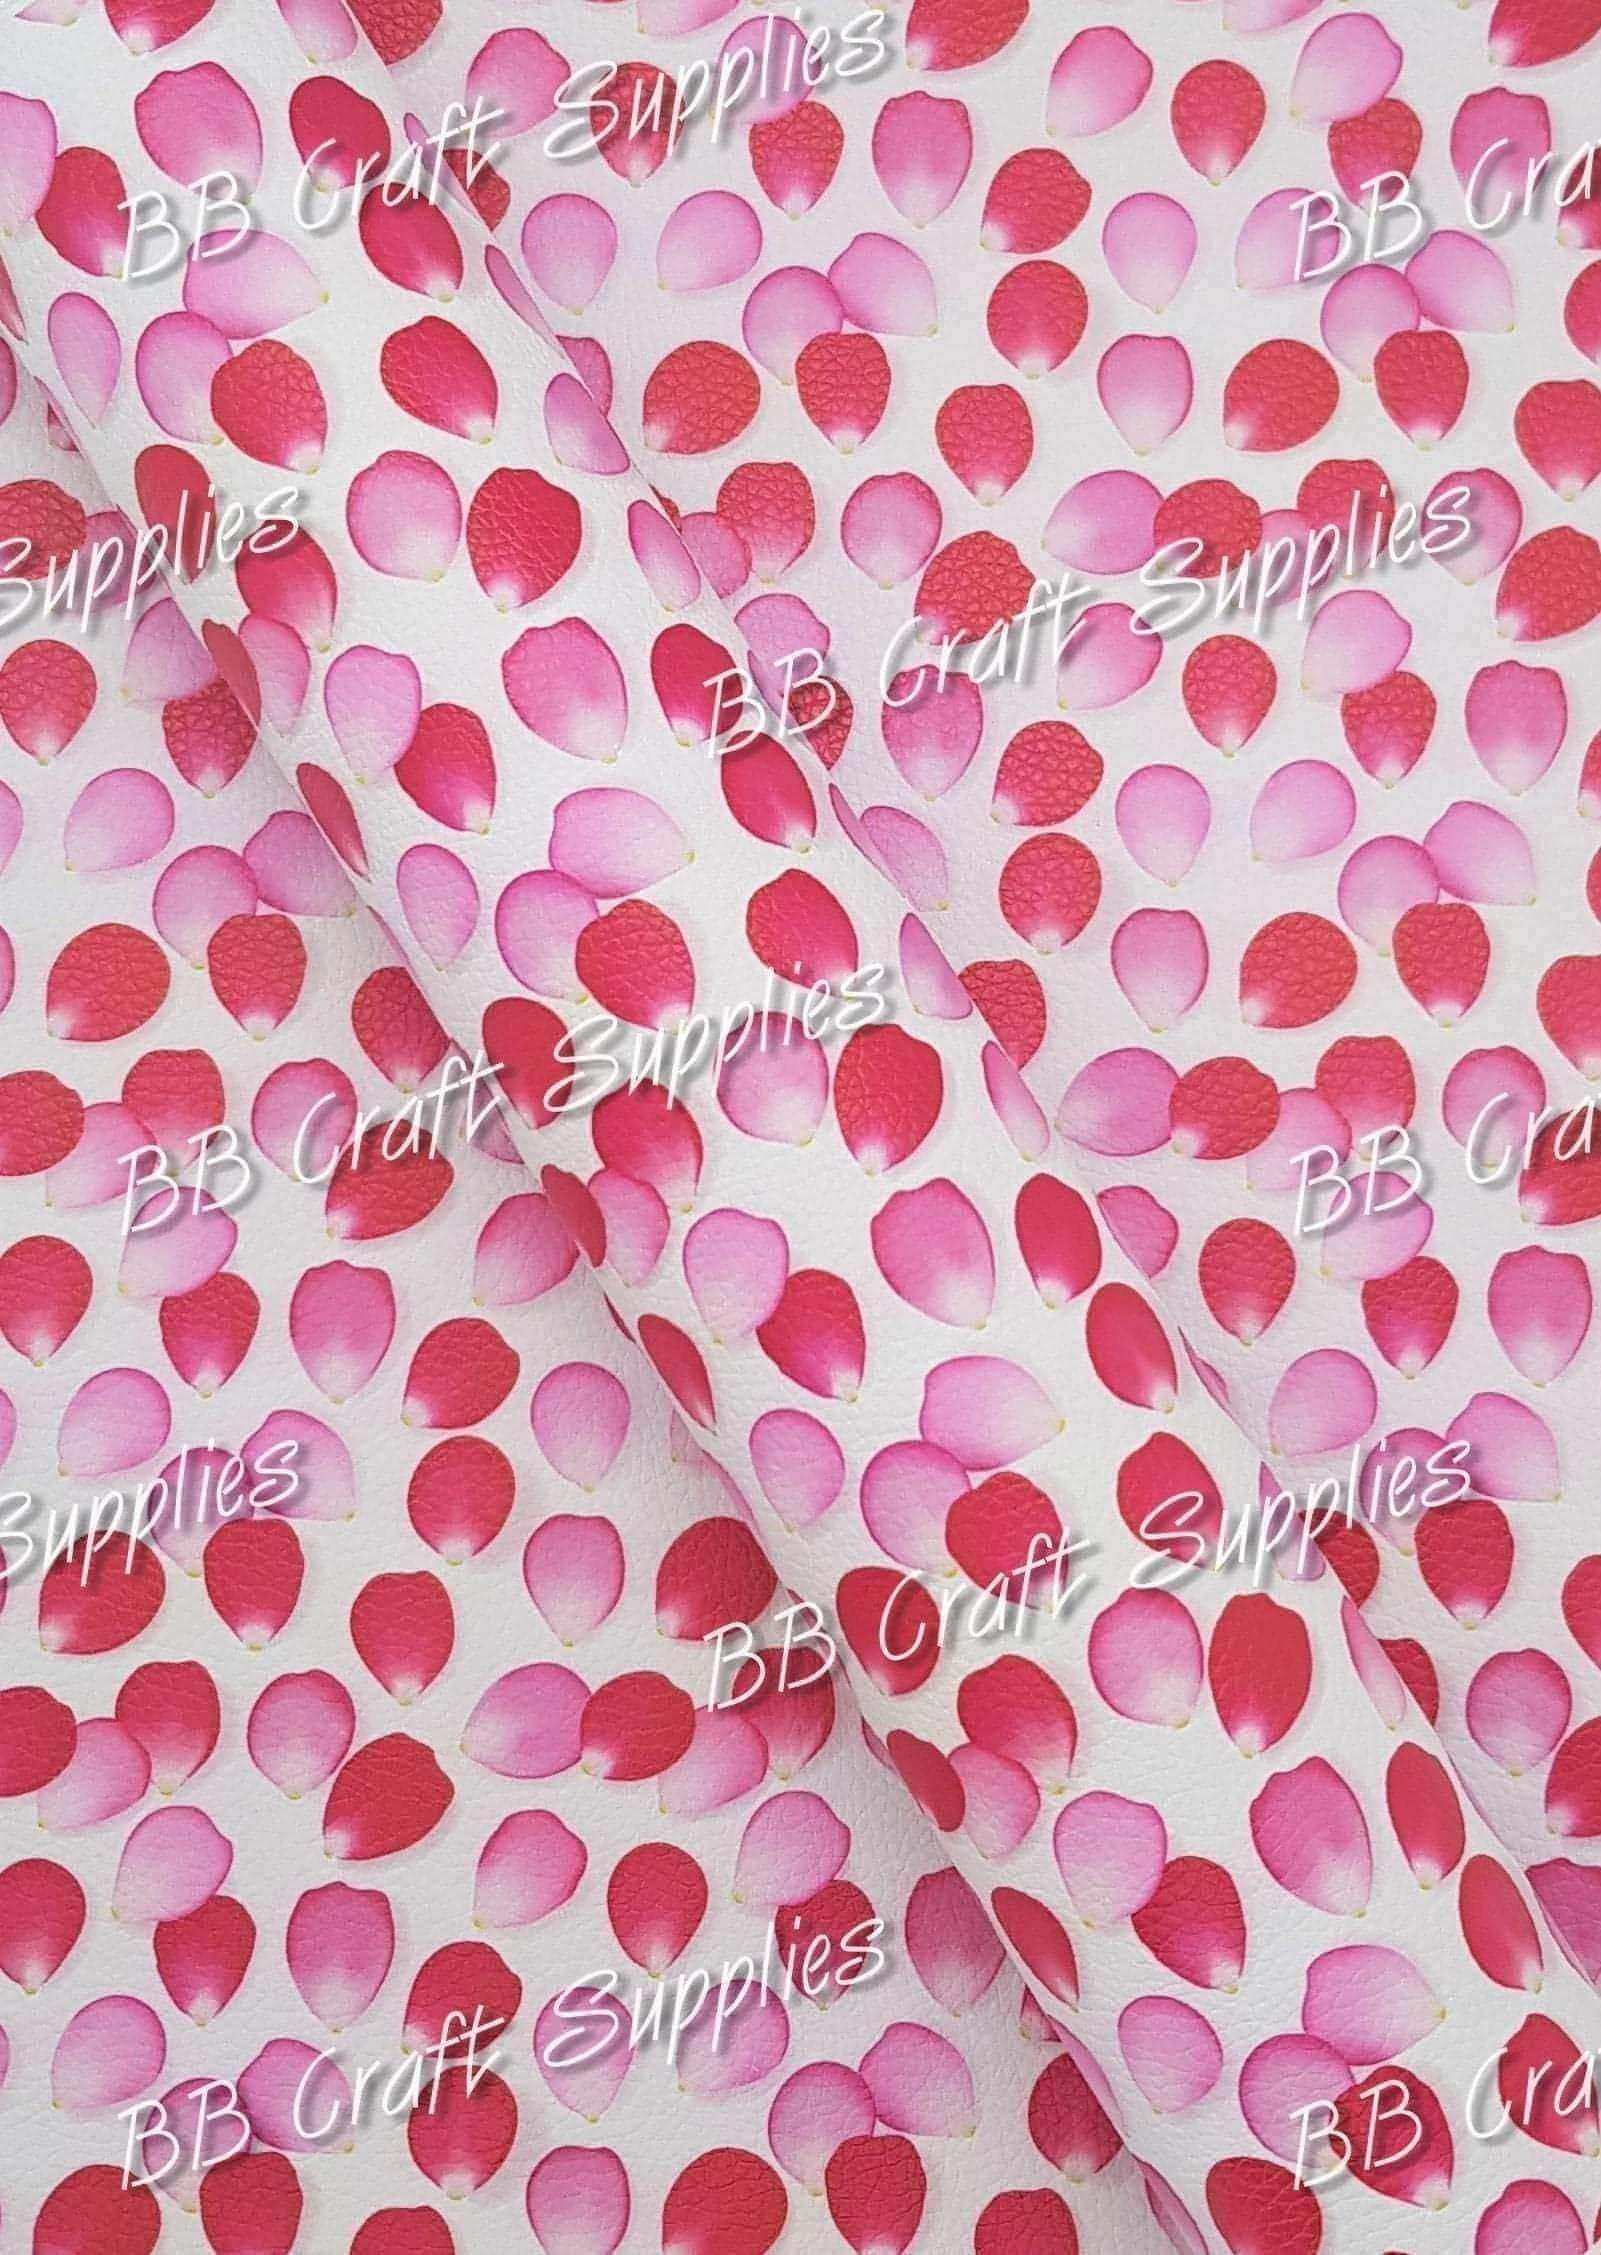 Rose Petals Litchi - Be my Valentine, ex's & oh's, Faux, Faux Leather, gnomes, Happy Valentines day, hearts, I Love you, key, Leather, leatherette, lips, Litchi, Love me again, valentines, xoxoxox, you & Me forever - Bare Butler Faux Leather Supplies 